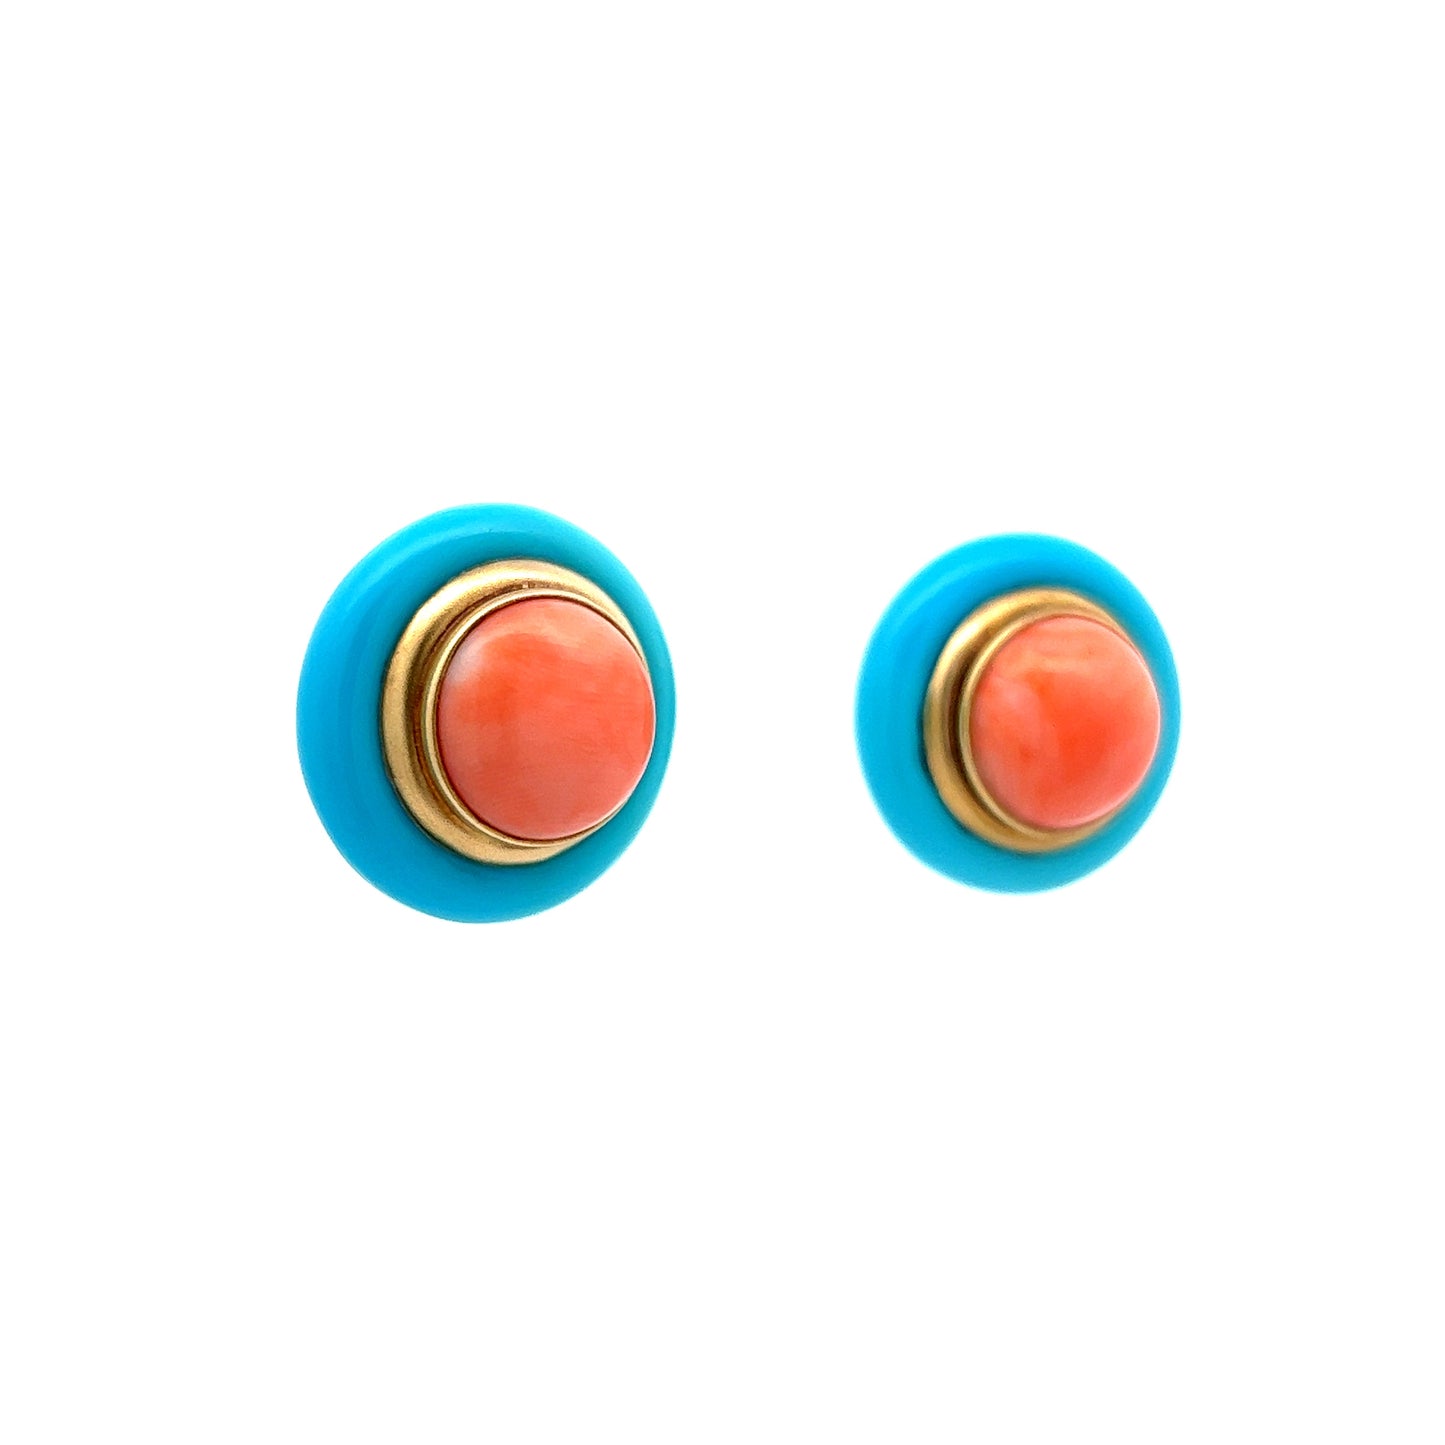 Vintage Inspired Coral & Turquoise Earrings in 14k Yellow Gold